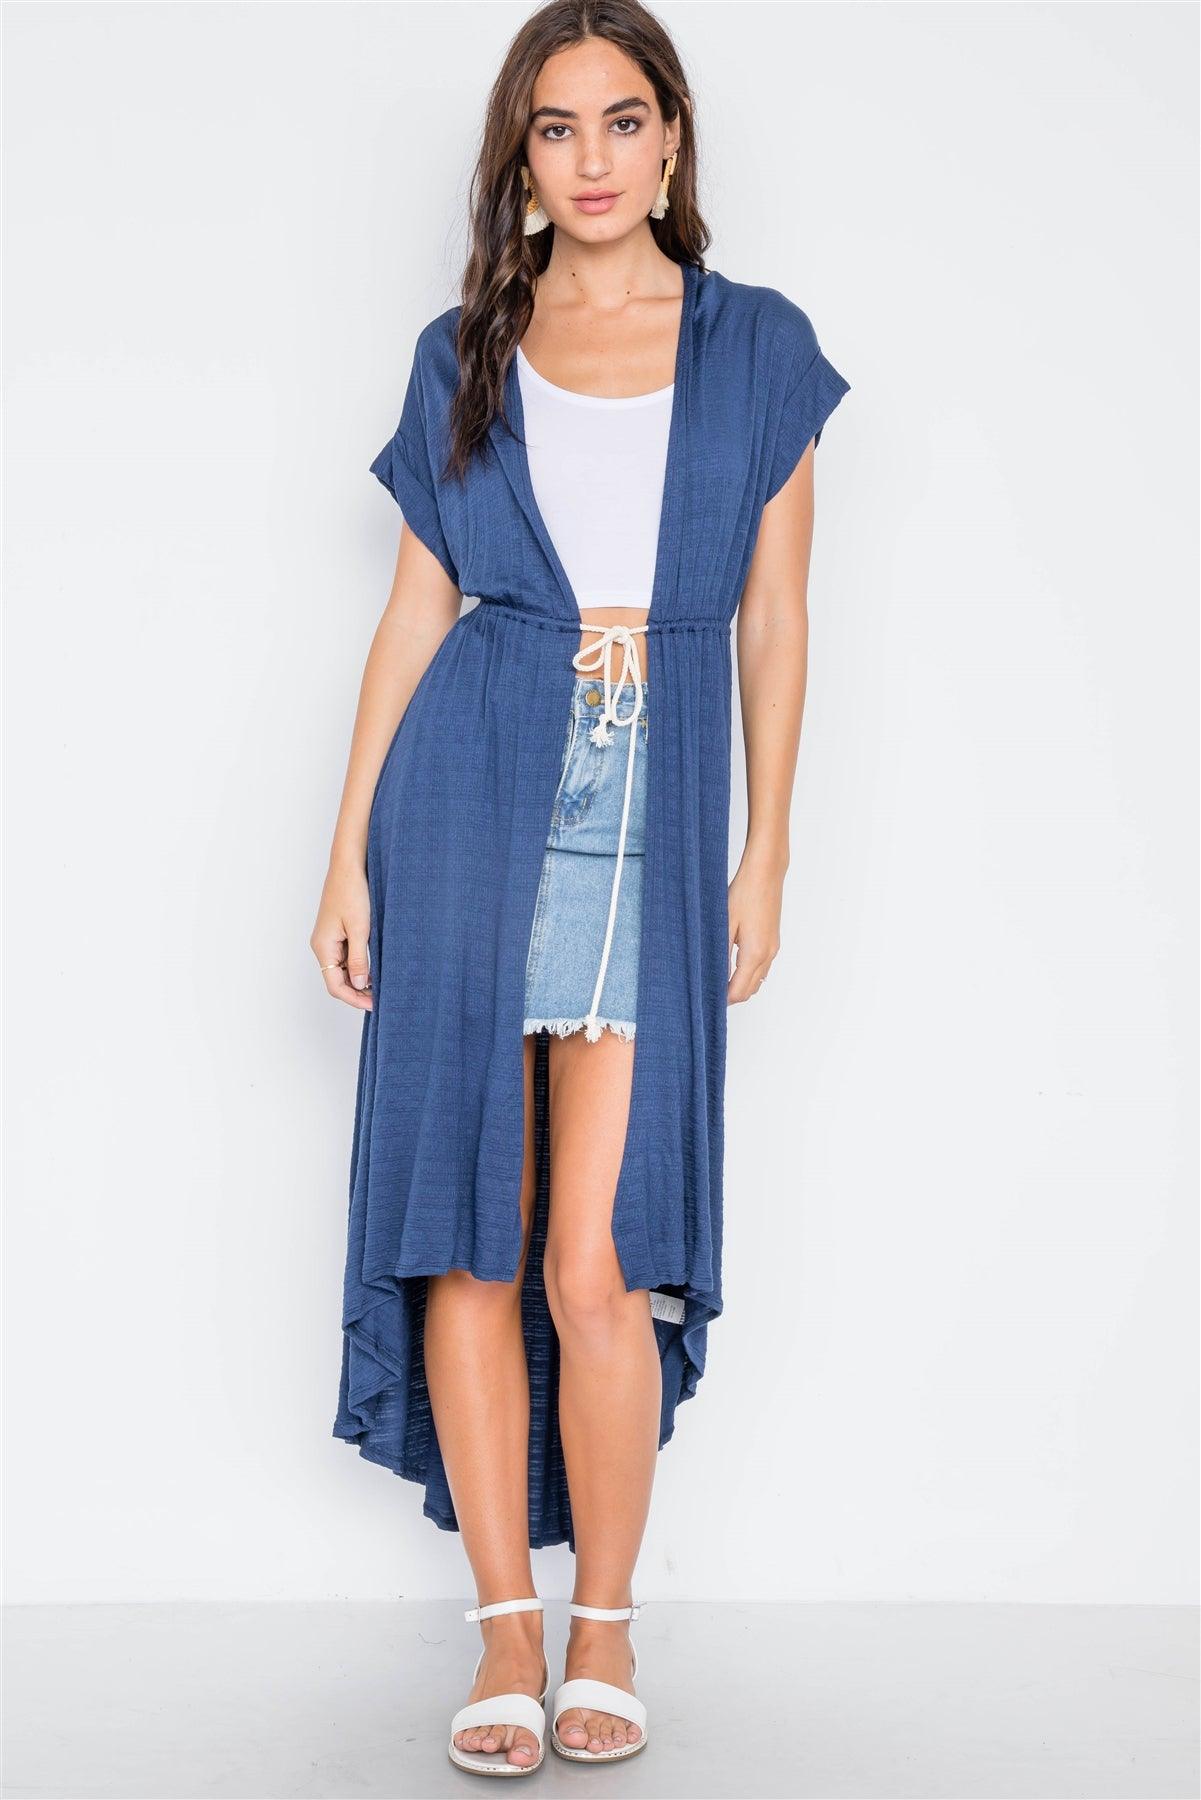 Navy Knit High Low Boho Cardigan Cover Up